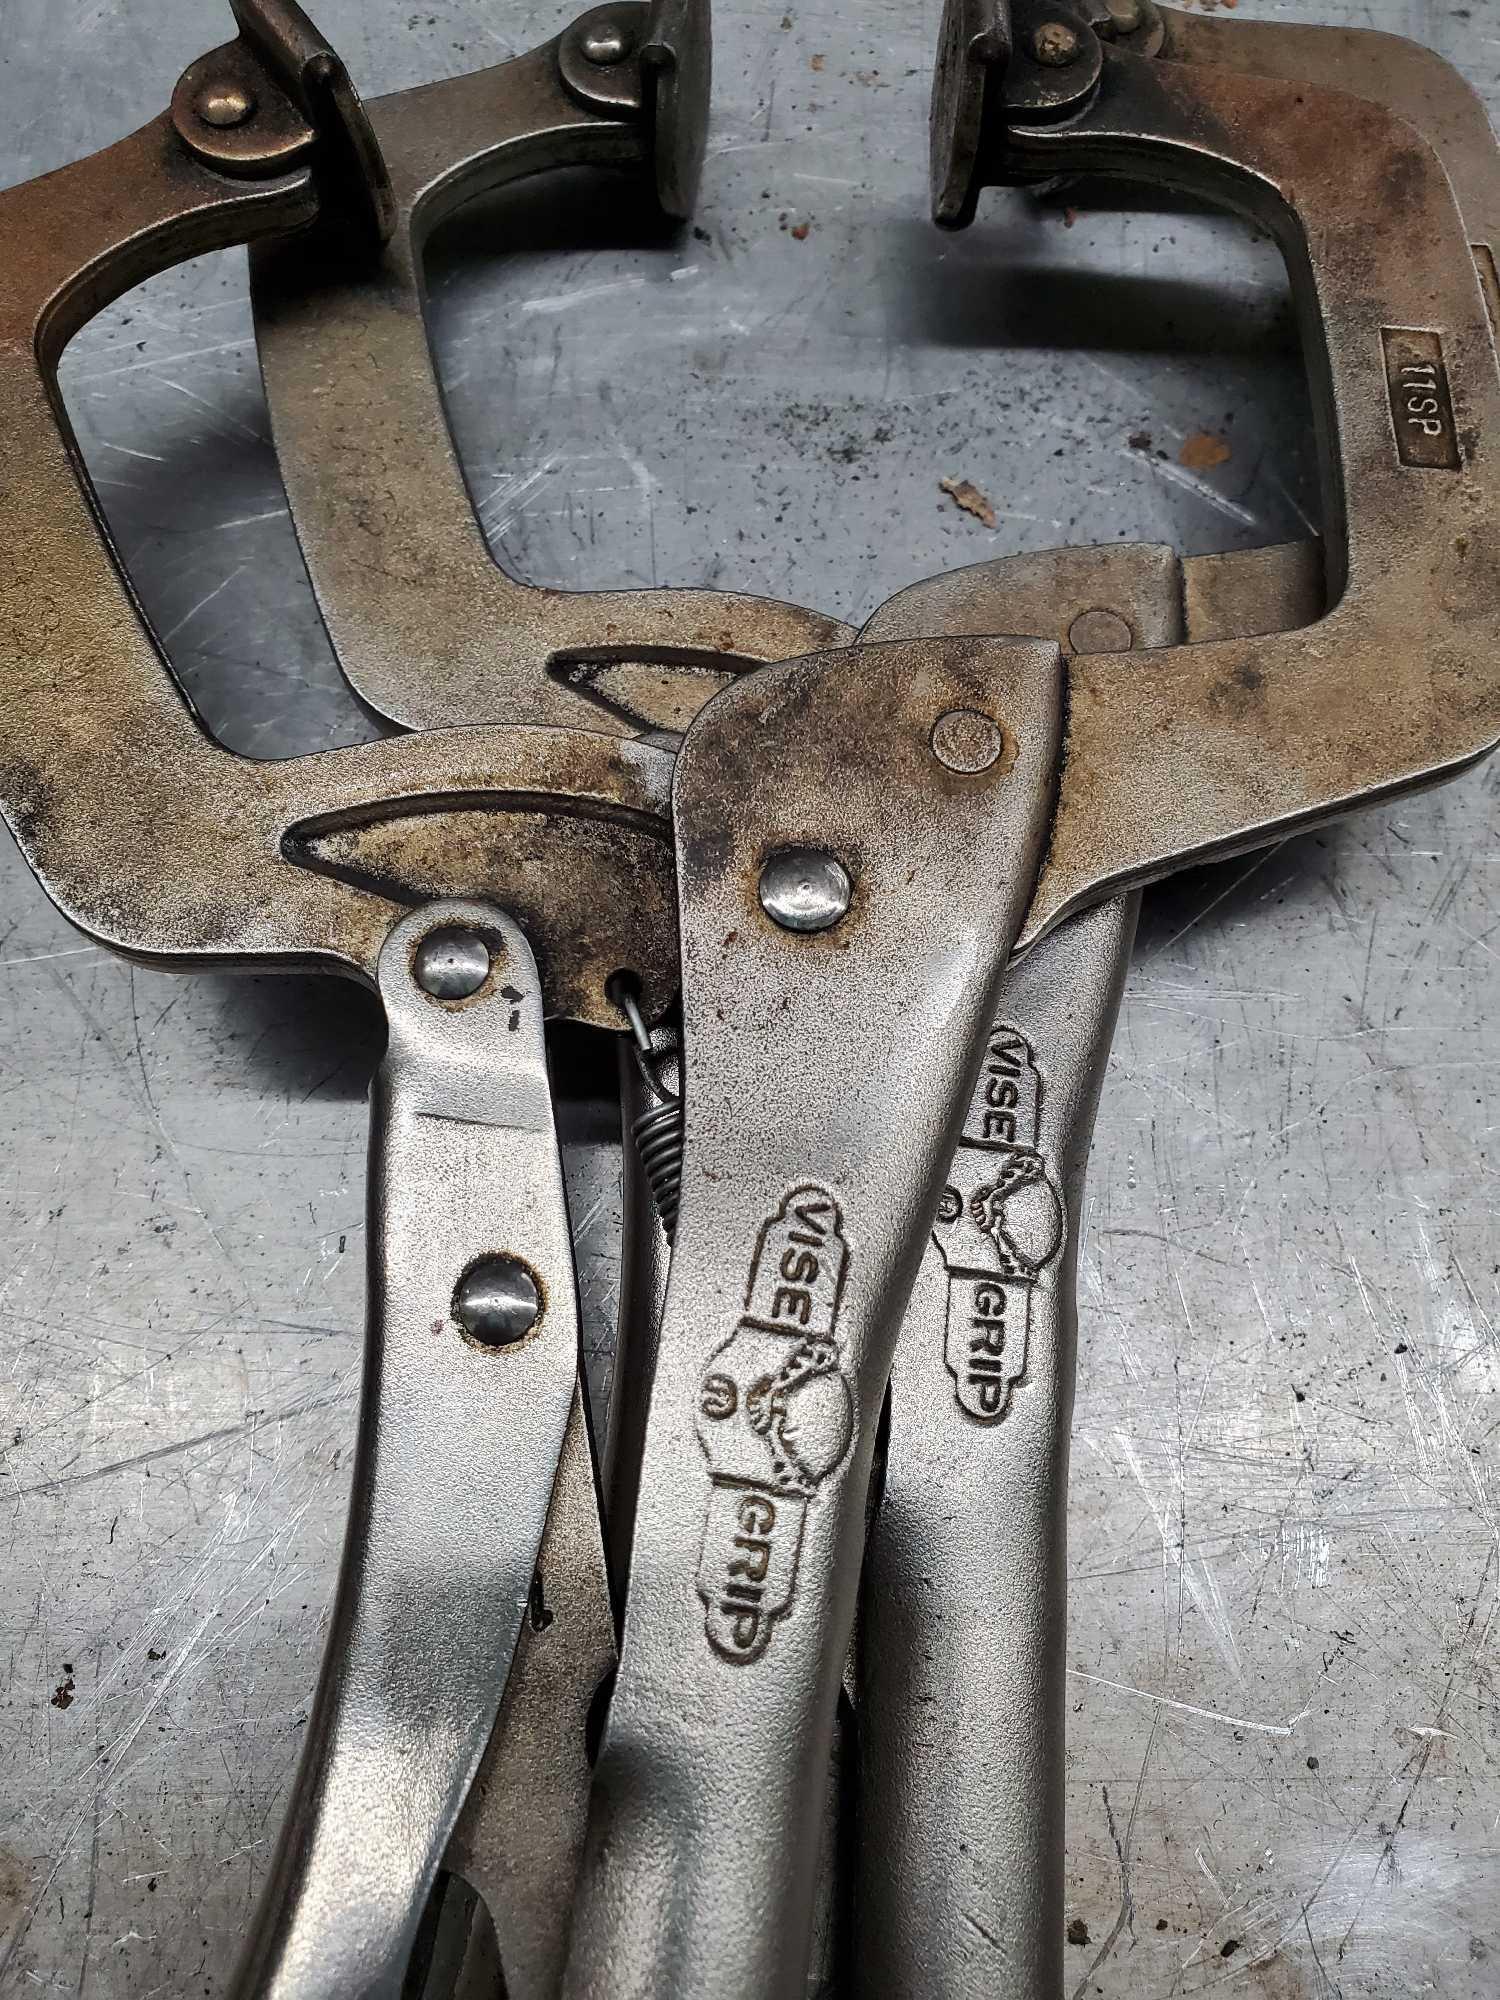 VICE GRIP CLAMPS